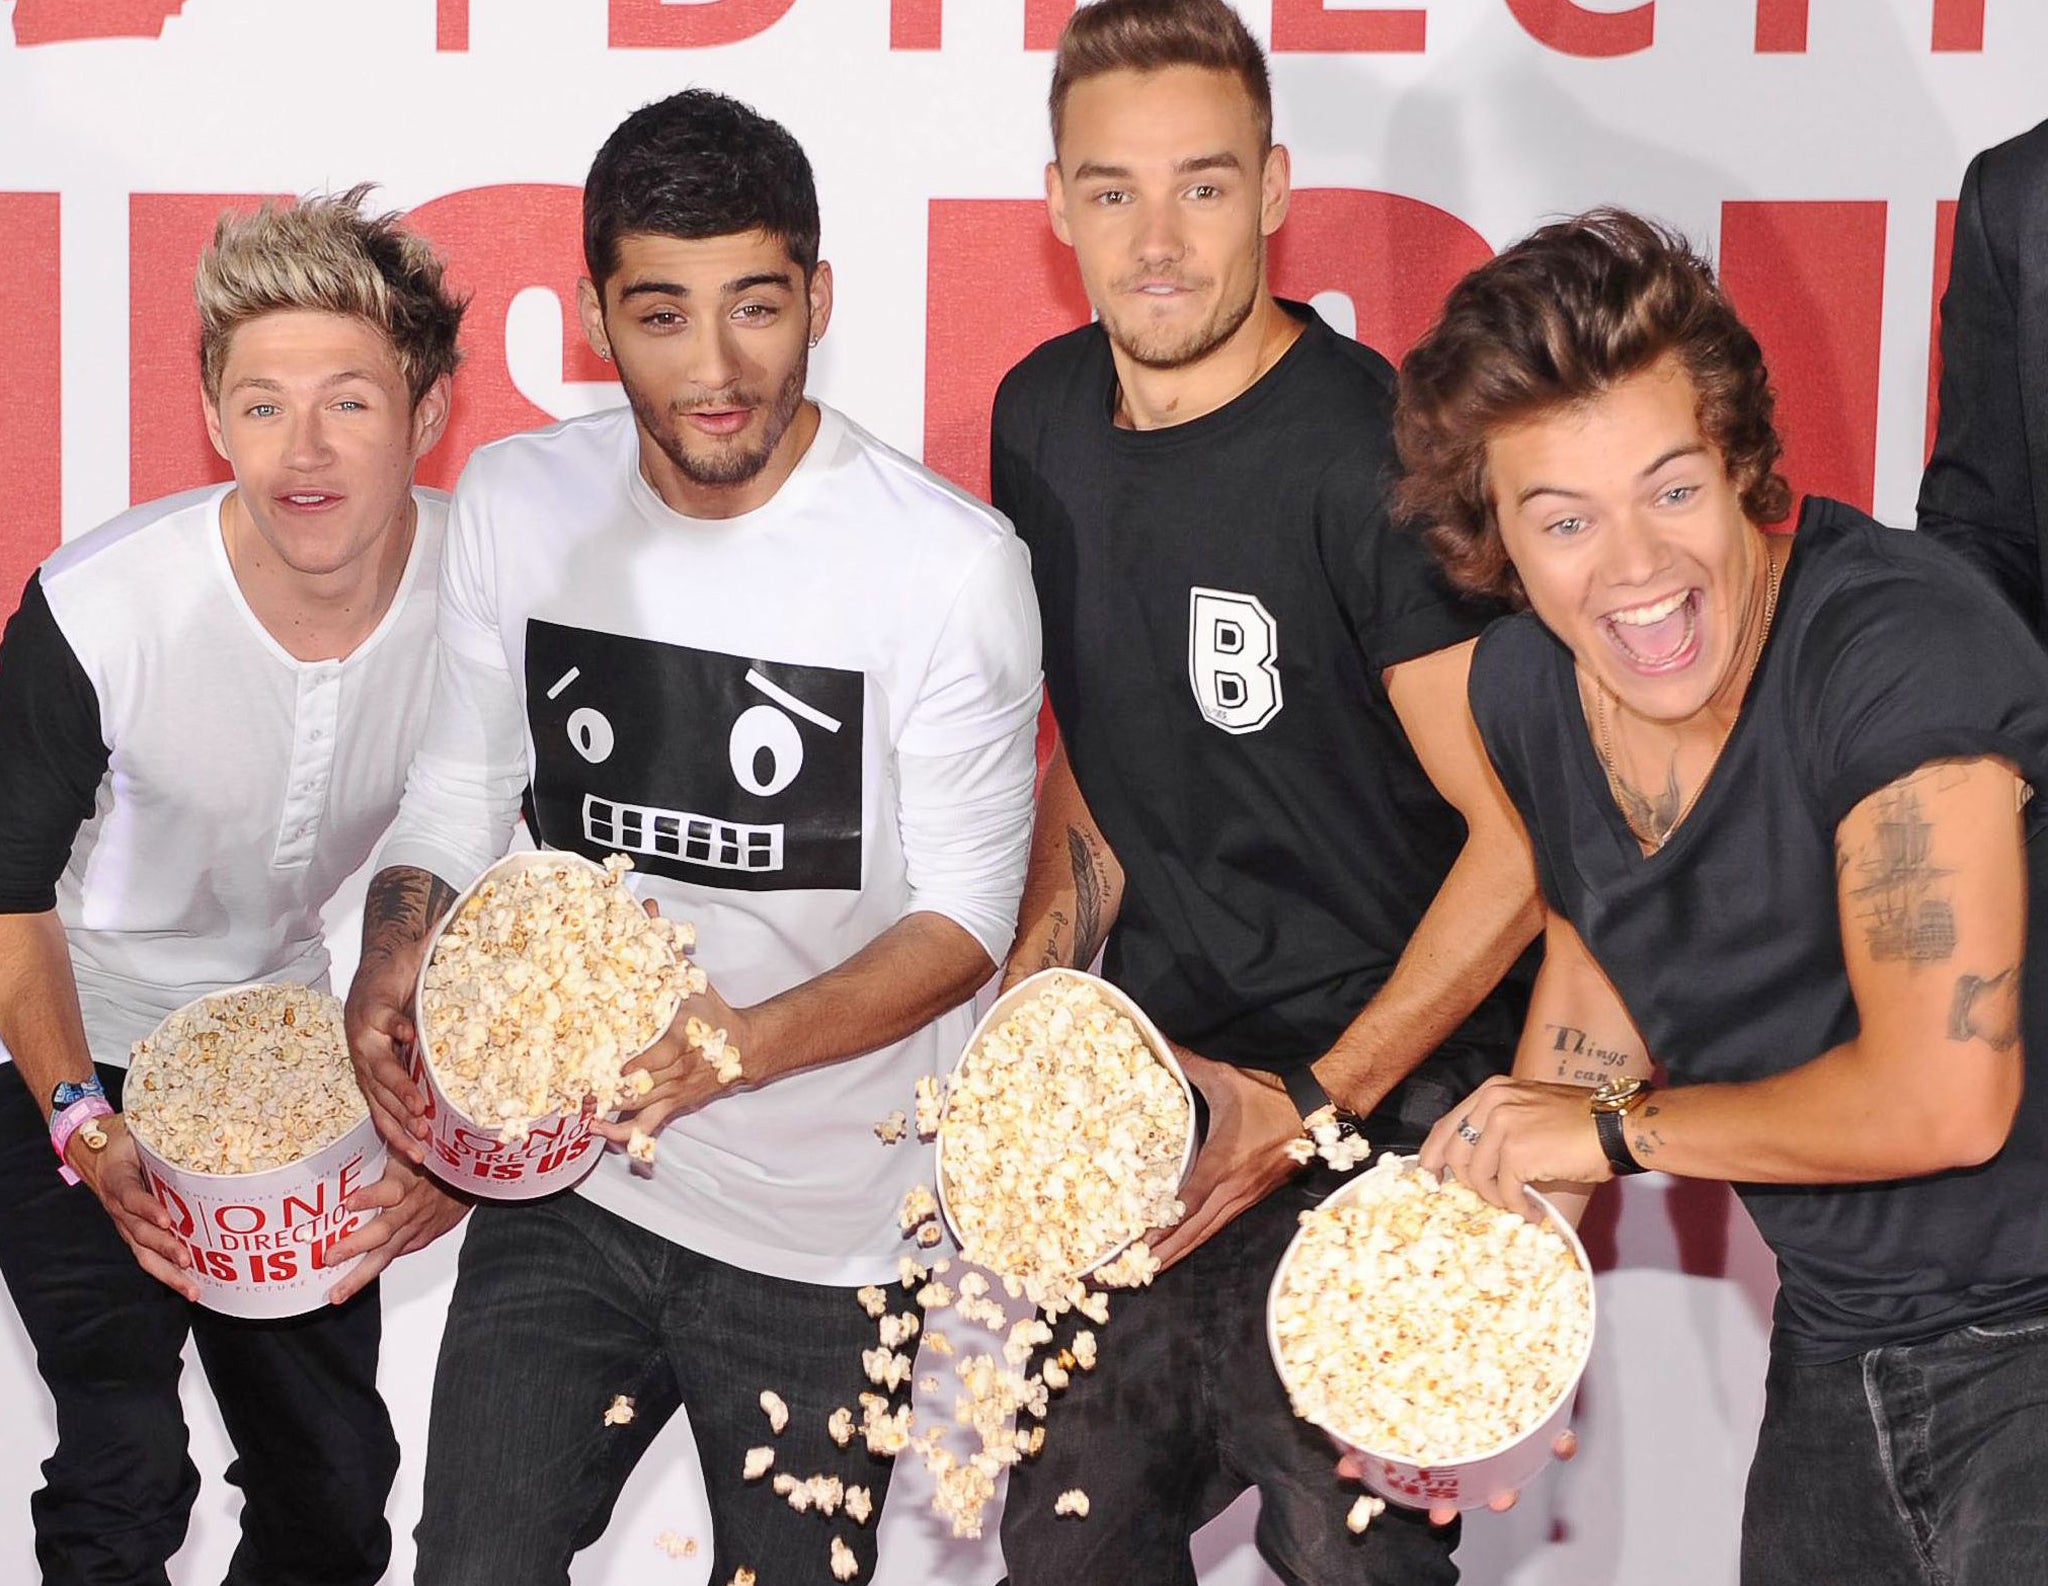 One Direction boys Niall Horan, Zayn Malik, Liam Payne and Harry Styles throwing popcorn at the launch of Morgan Spurlock's new documentary This Is Us